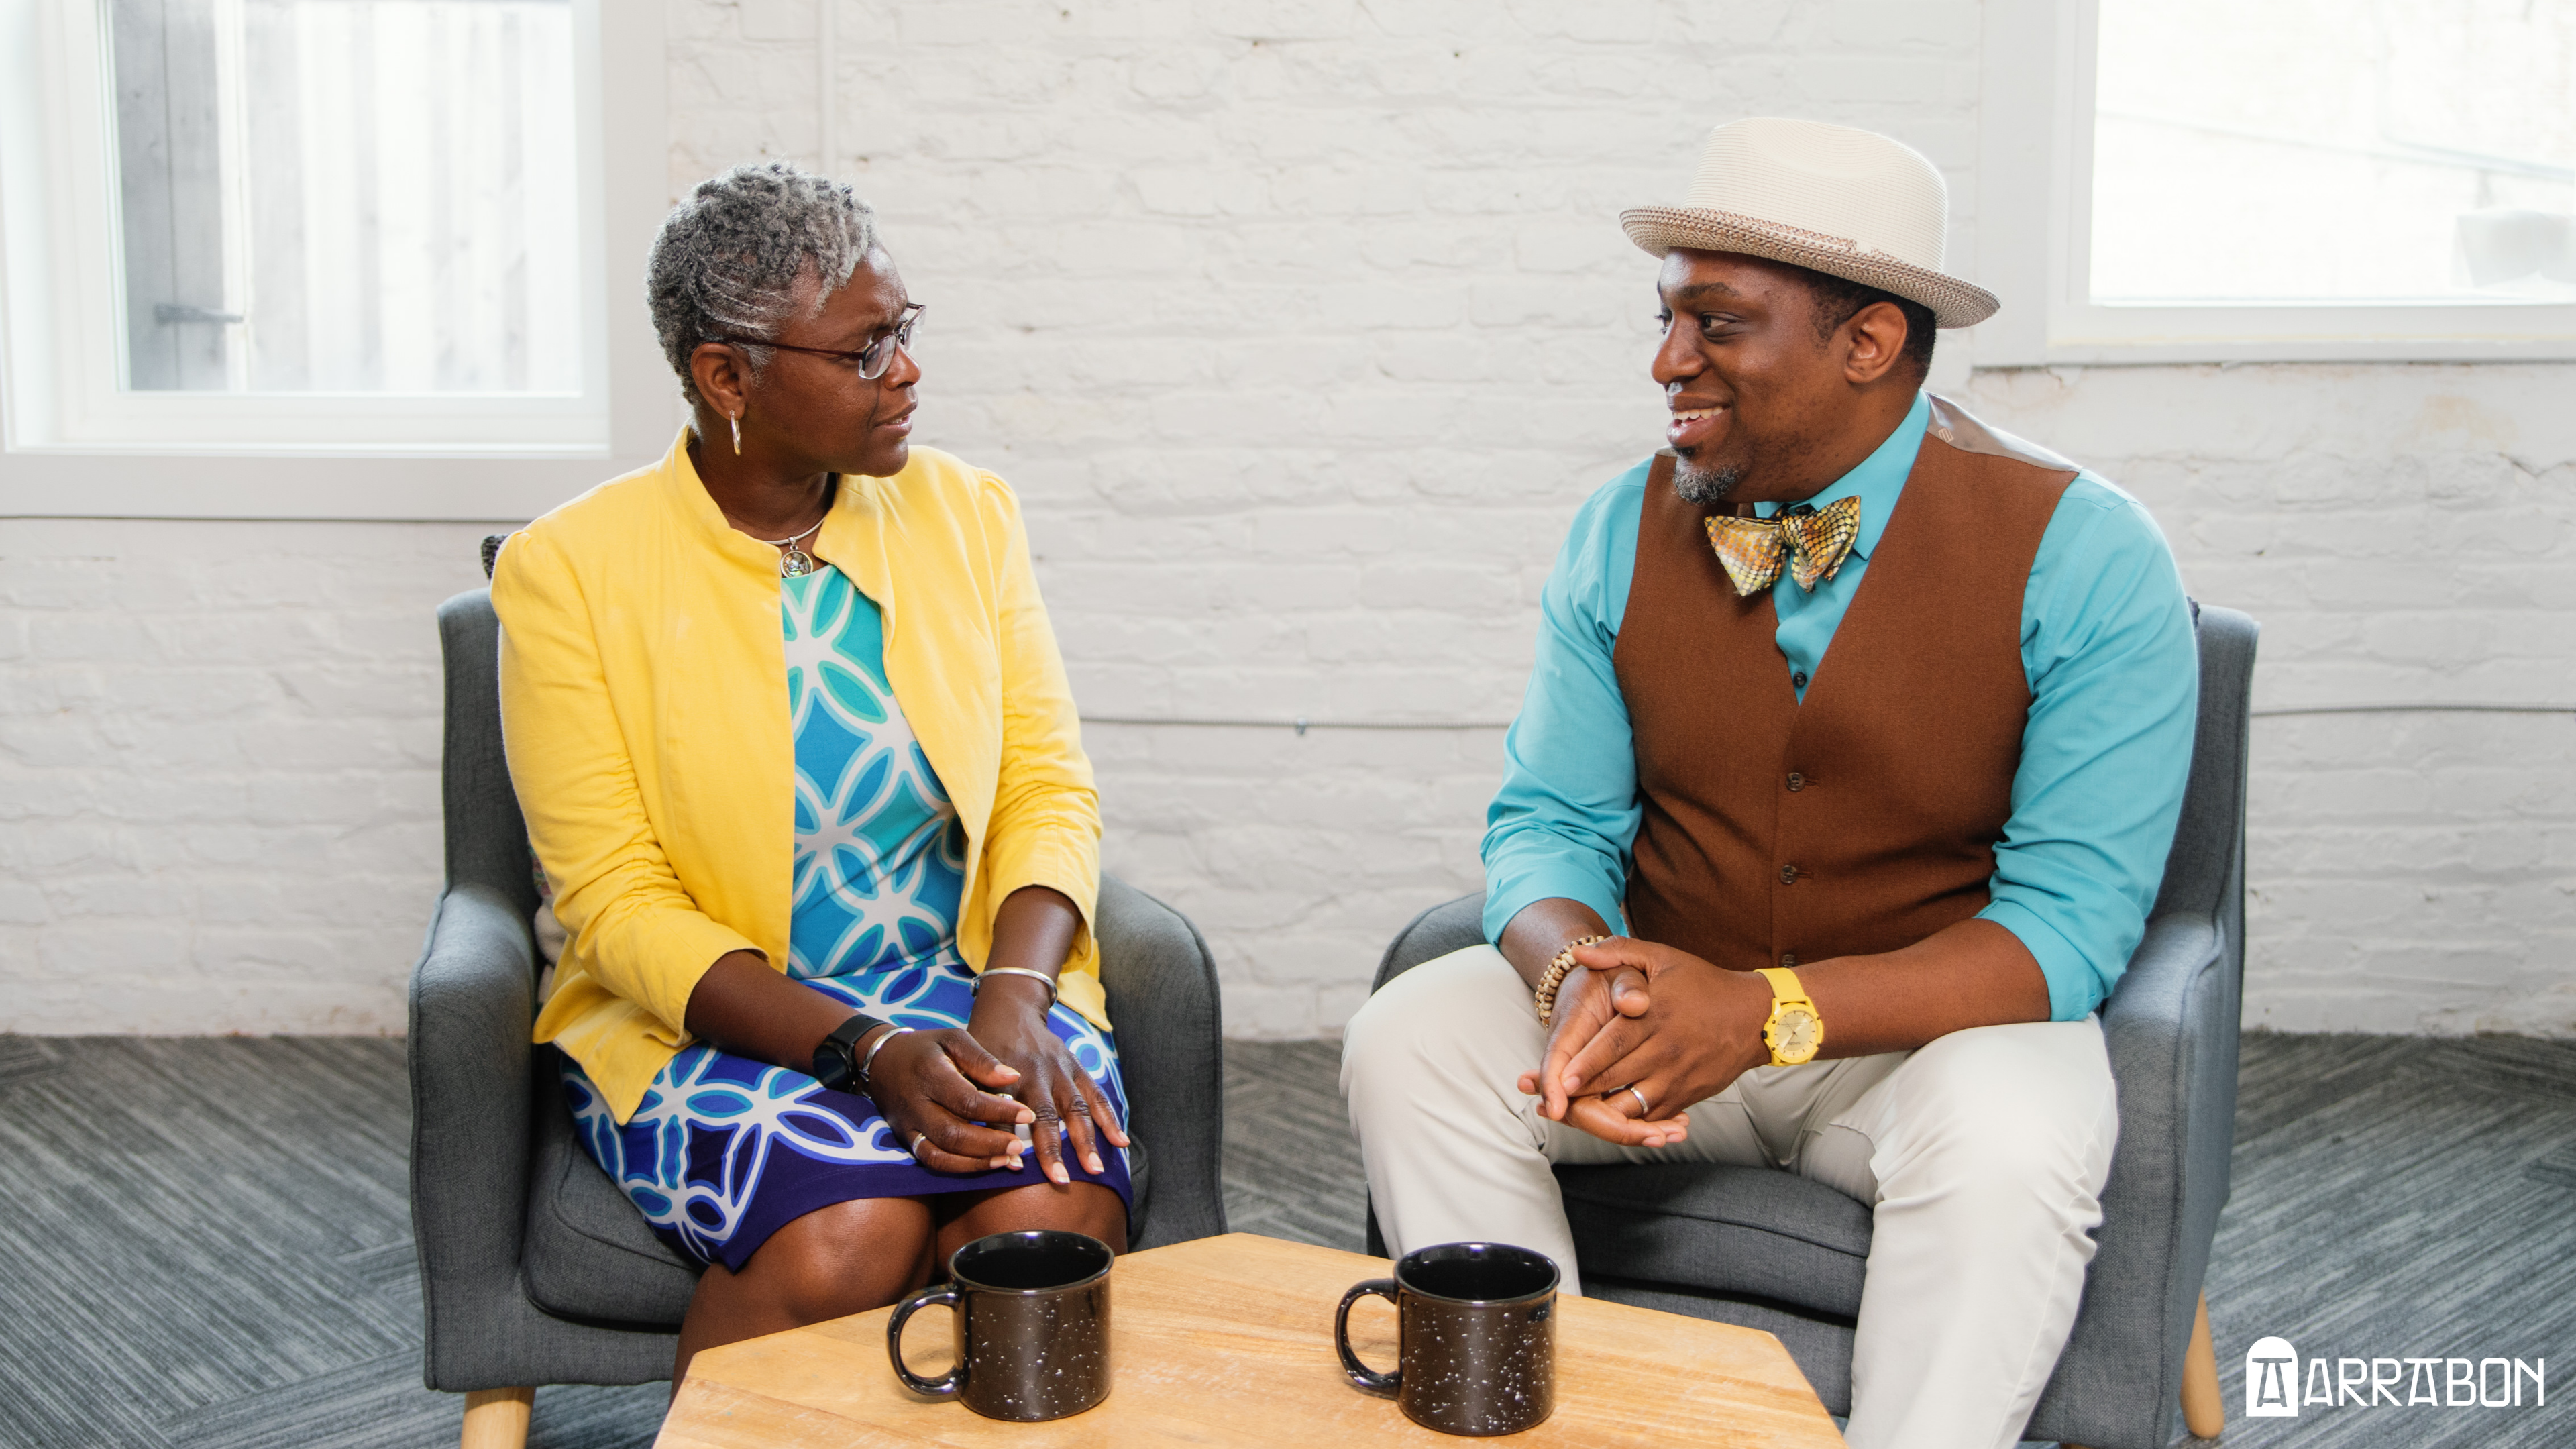 Abigail, wearing a yellow jacket and blue-green sheath dress, faces David who is wearing a tan hat, teal shirt, and brown vest. There’s a coffee table in front of them with two mugs.